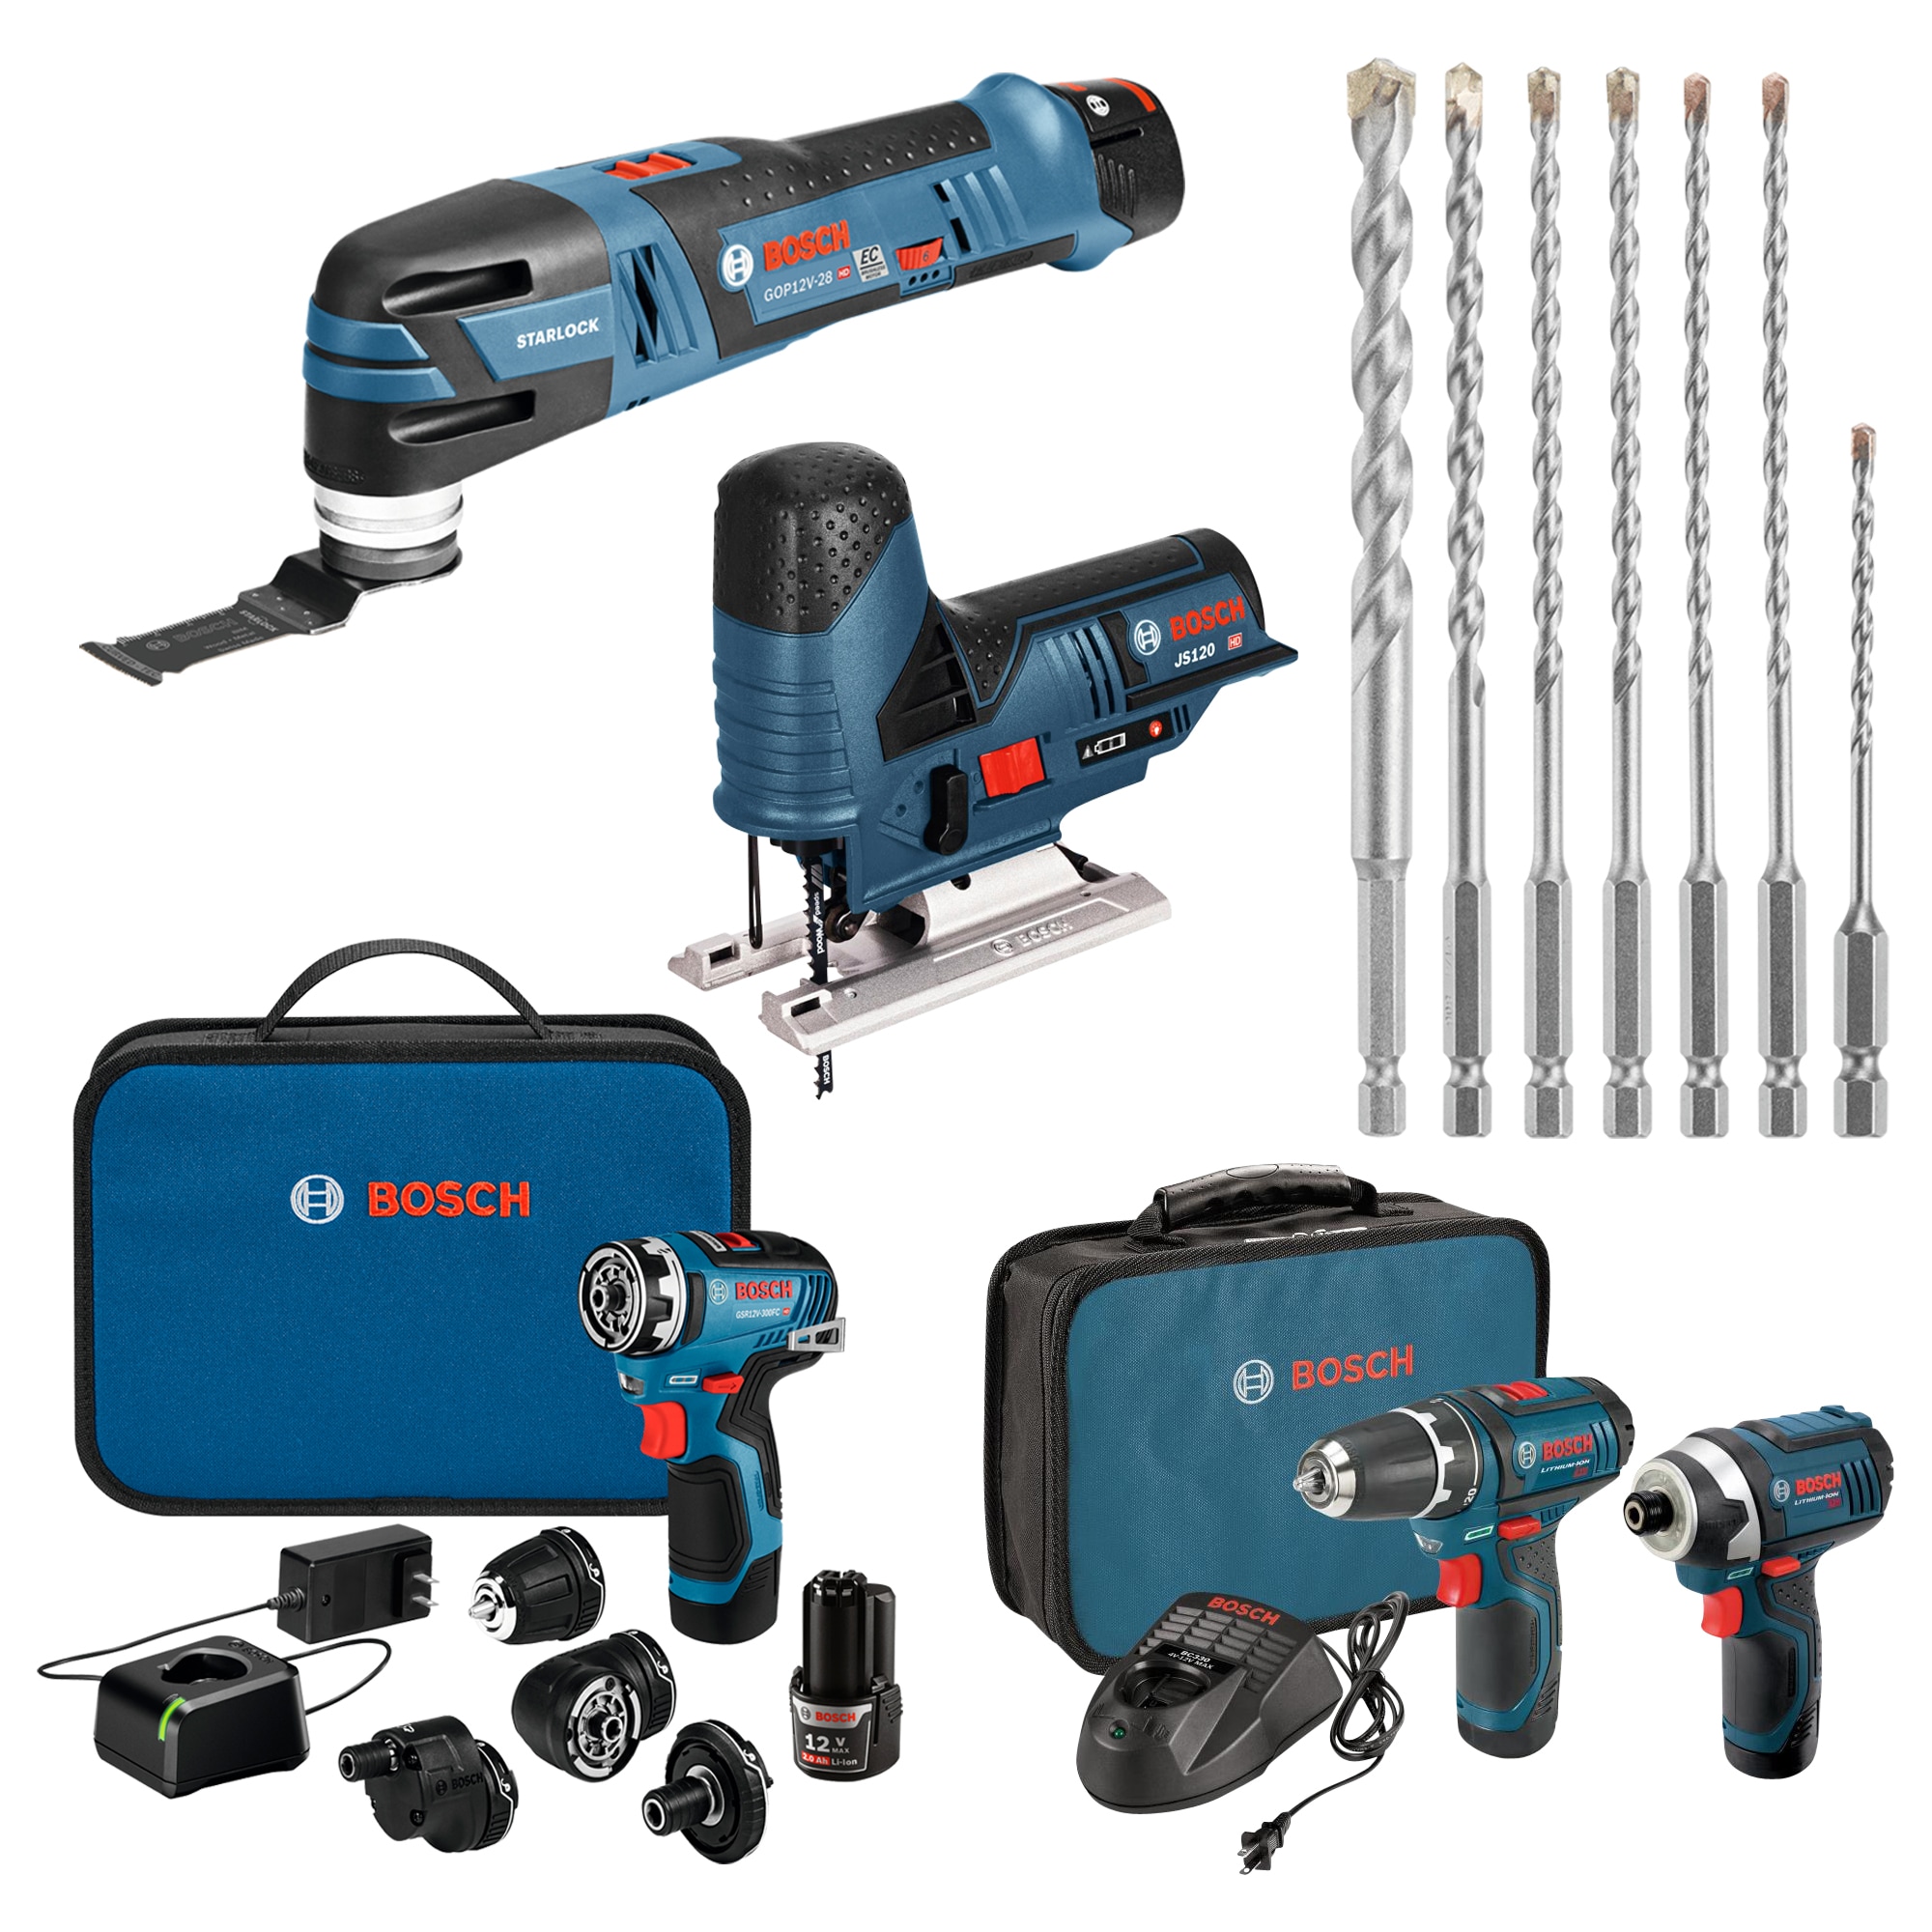 Bosch 12V Max Cordless Tool Collection